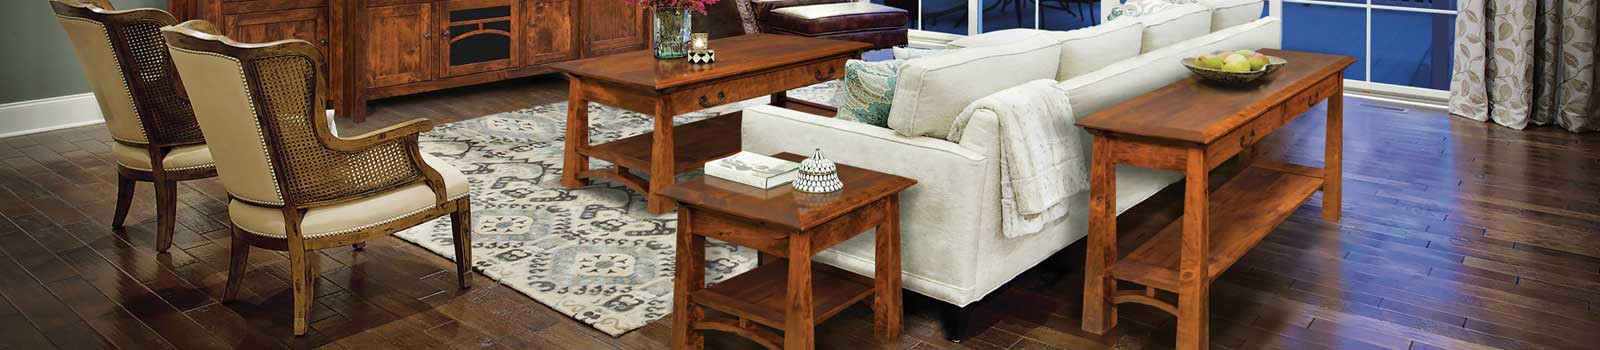 Special Price amish living room furniture